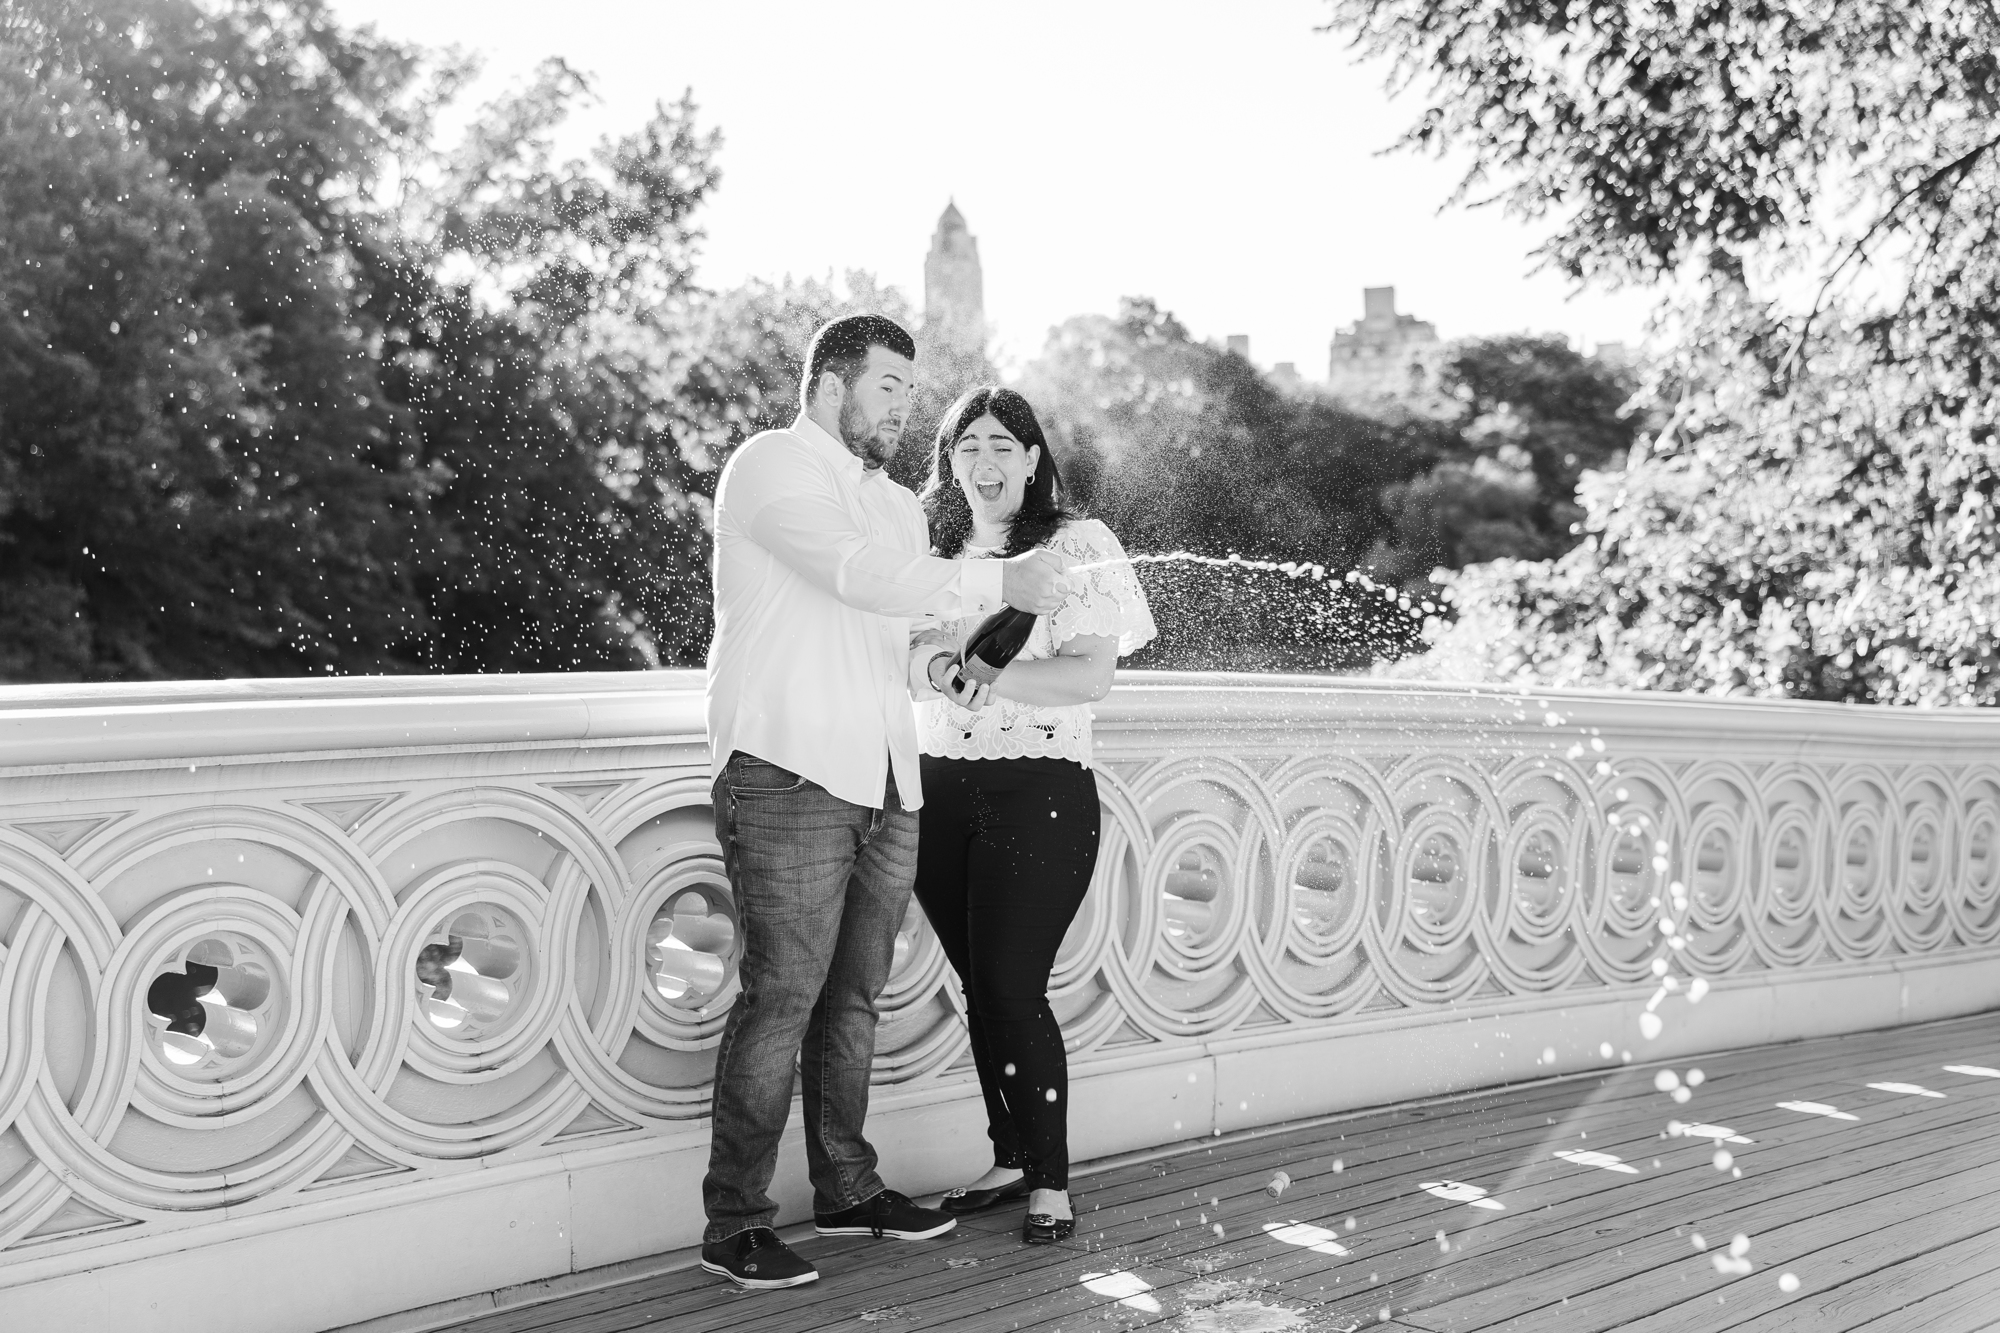 Vibrant Central Park Engagement Photos in New York